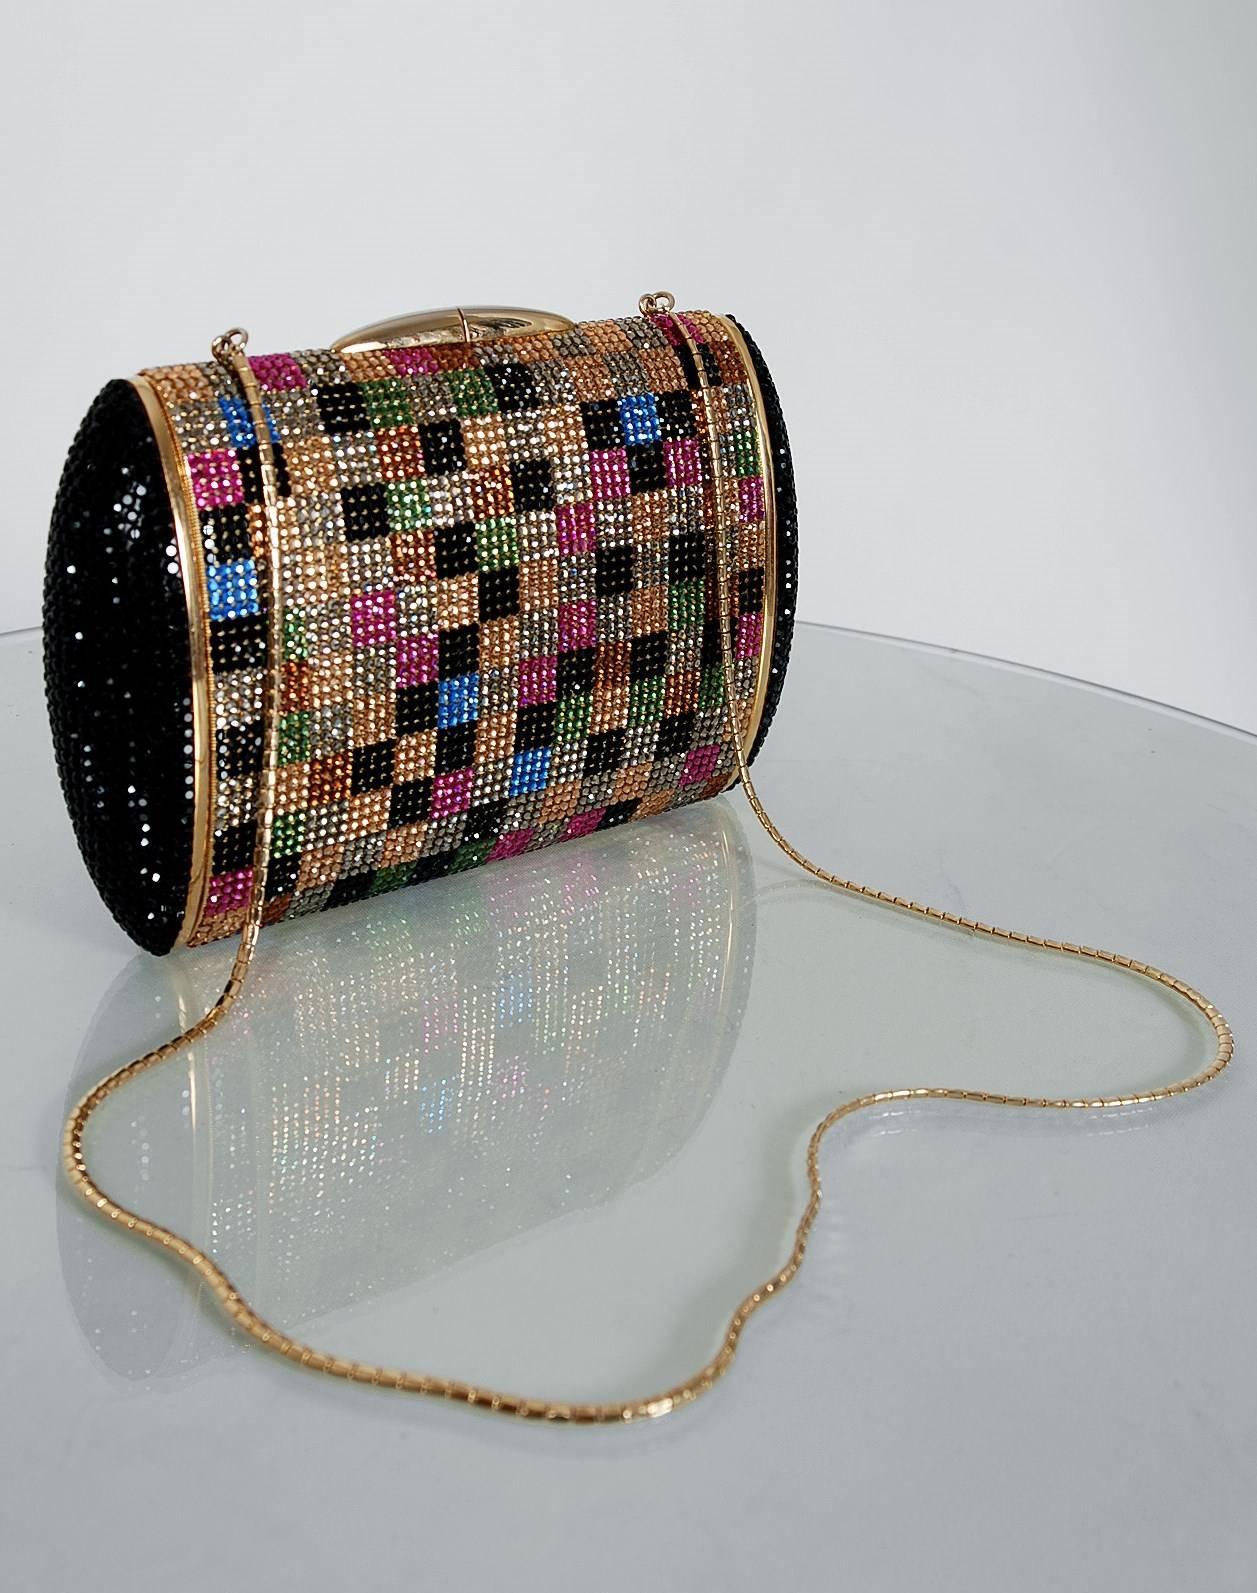 Breathtaking multi-colored deco squares crystal evening purse by the iconic American designer, Judith Leiber. Her creations are found in permanent collections at The Victoria and Albert Museum in London, The Metropolitan Museum of Art in New York,